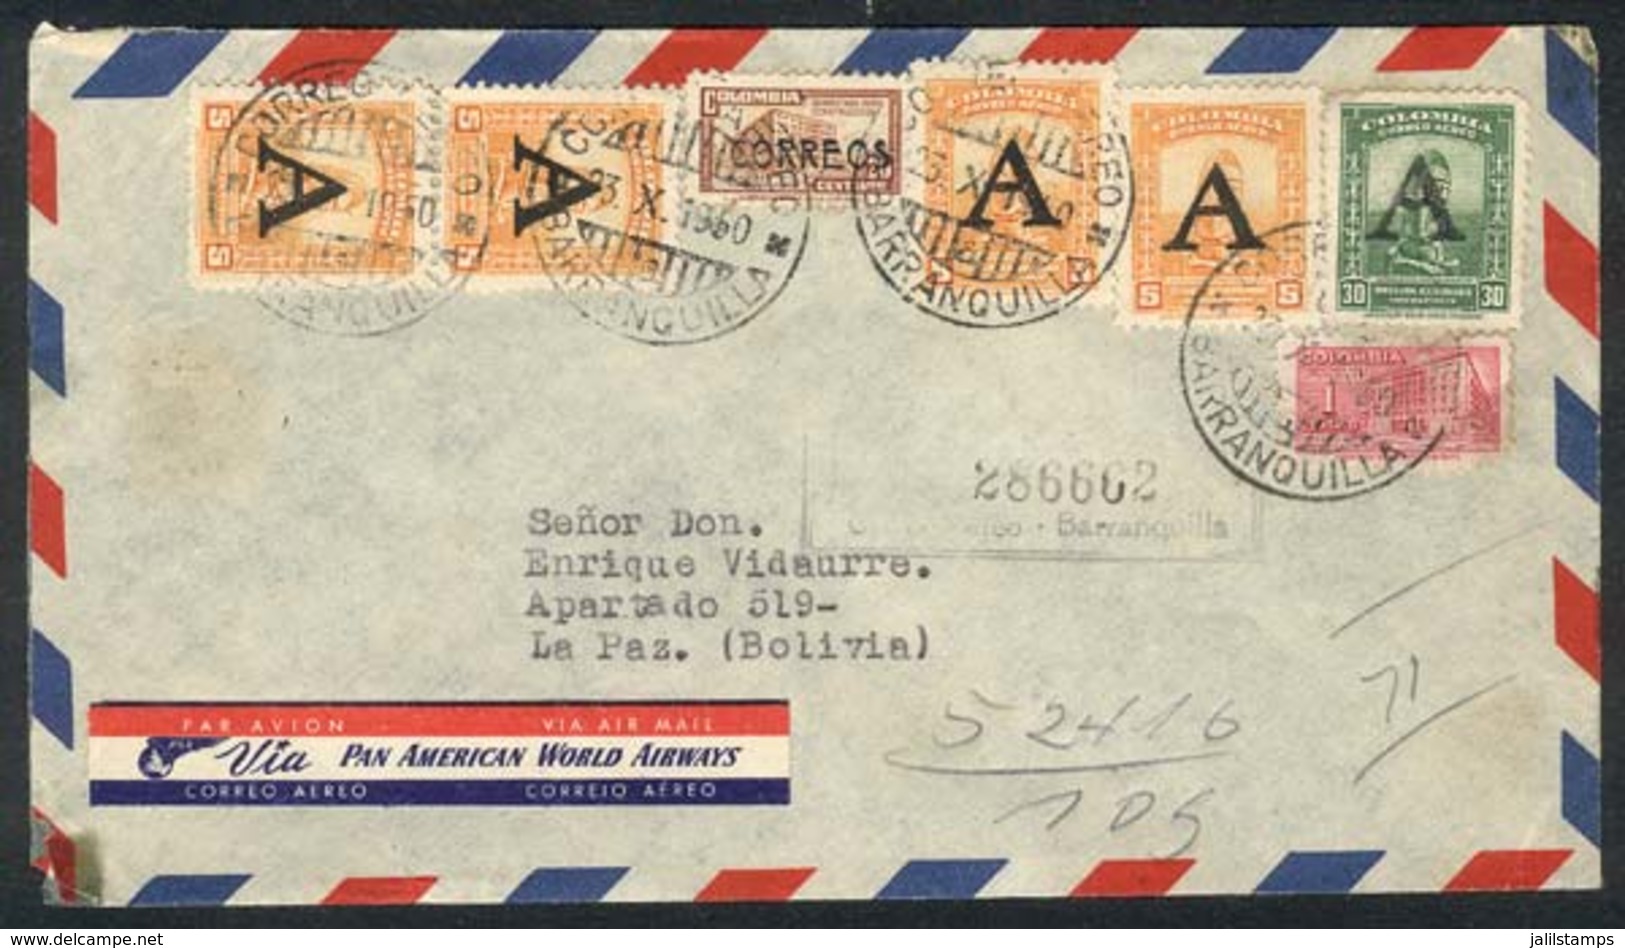 COLOMBIA: Airmail Cover With Nice Postage Sent From Barranquilla To La Paz (Bolivia) On 23/OC/1950, Interesting! - Colombia